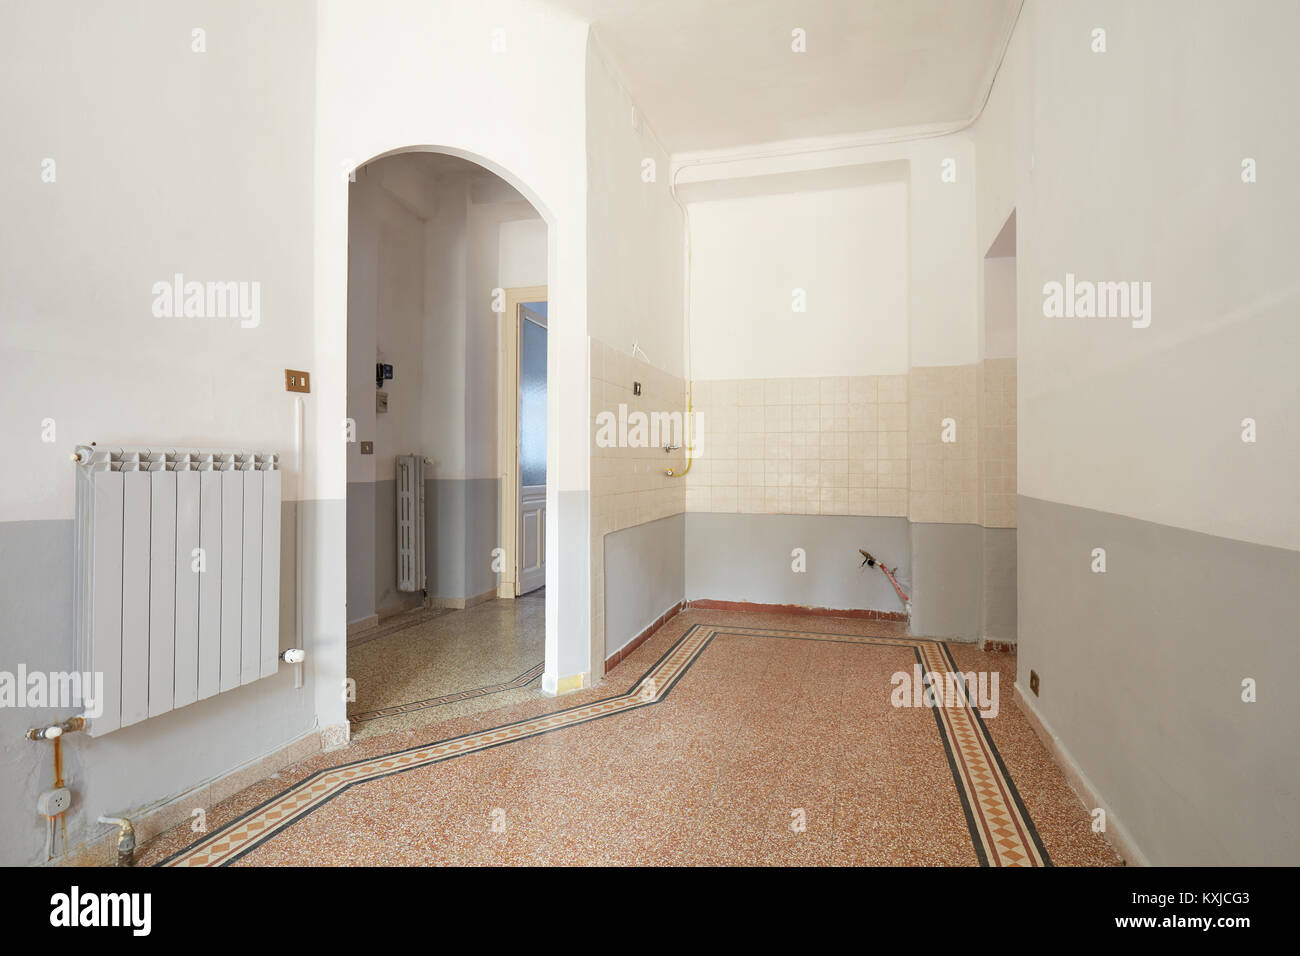 Empty living room and kitchen area interior in old apartment with tiled floor Stock Photo